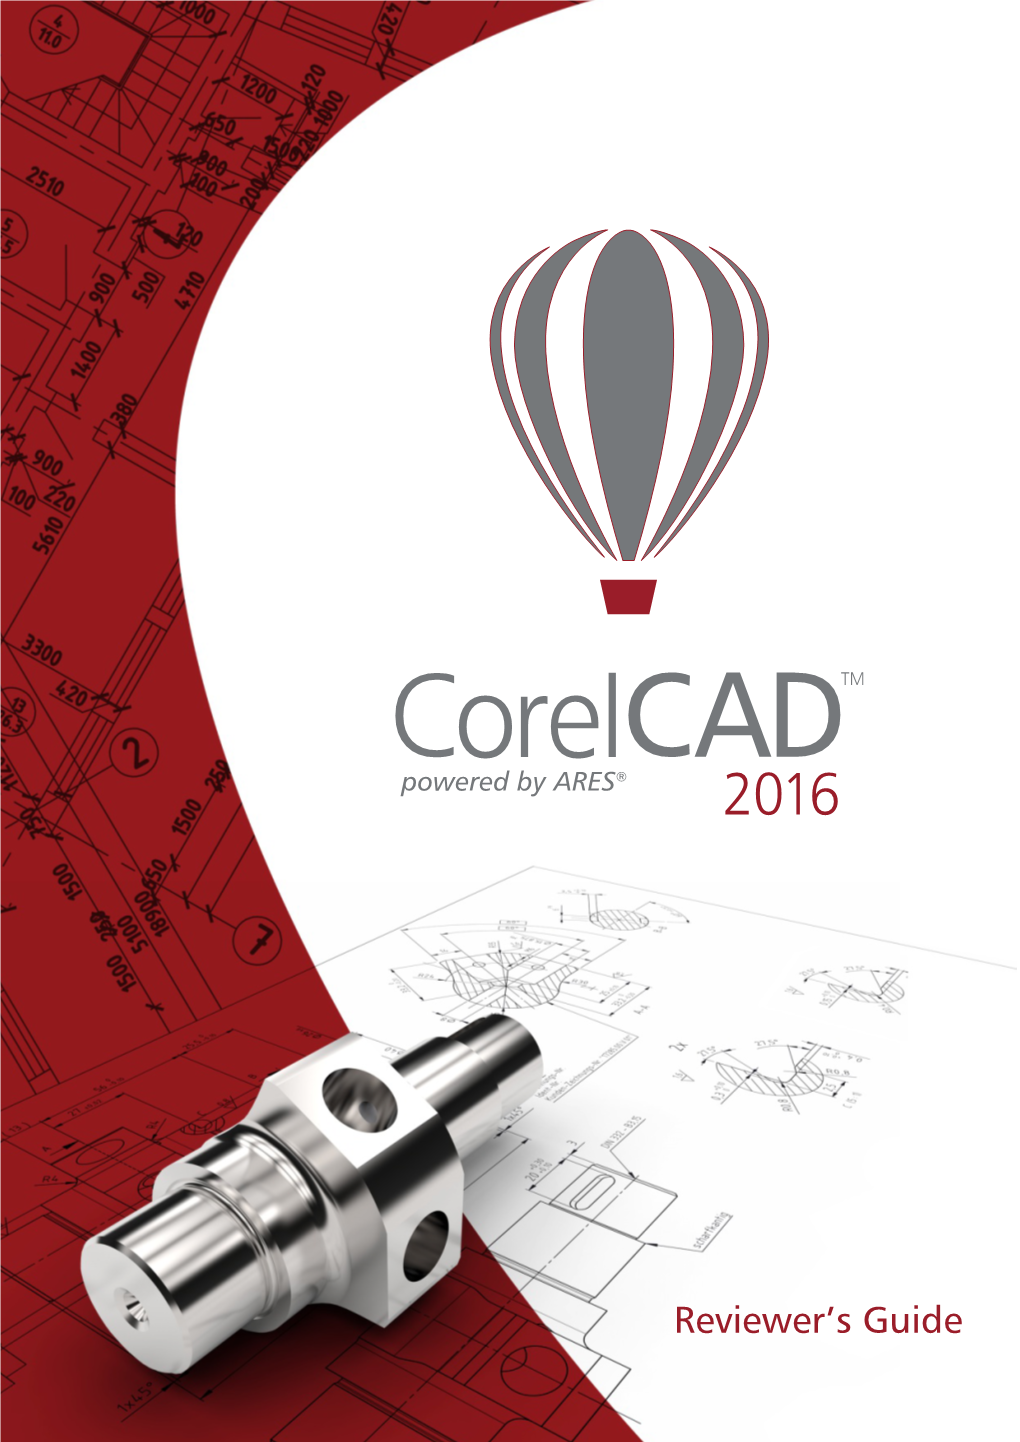 Corelcad 2016 Reviewer's Guide